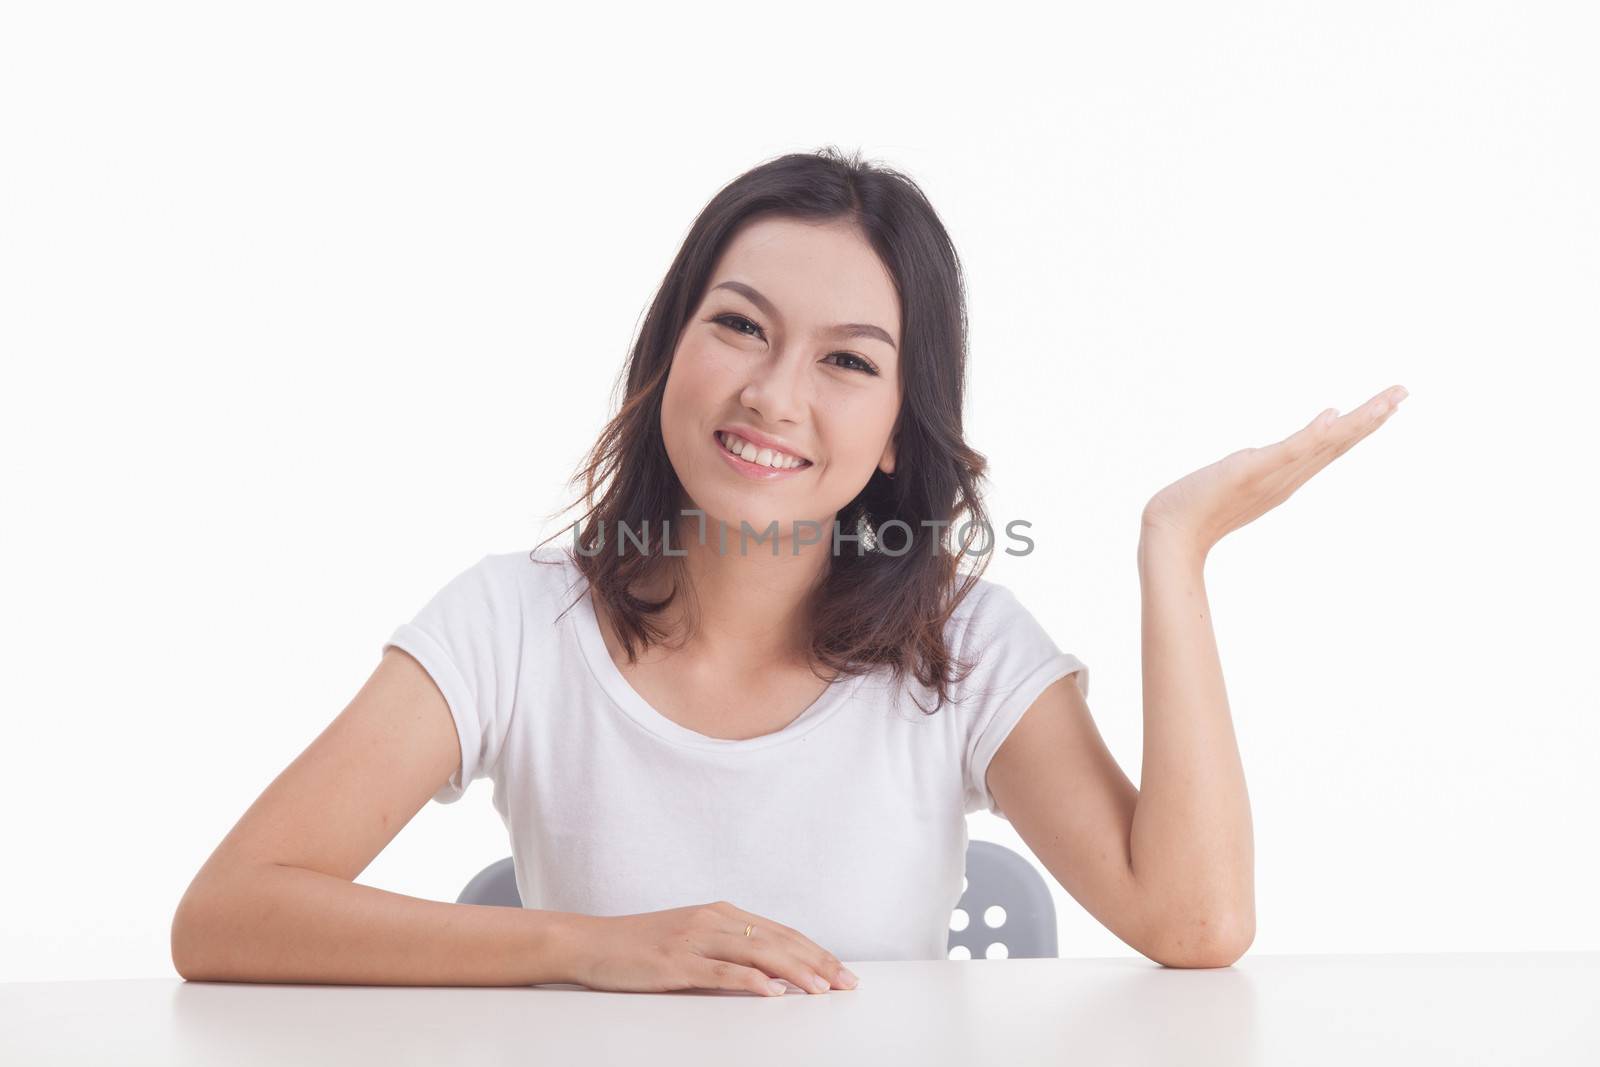 Asian woman isolated on white background. white t-shirt, sit on chair with table